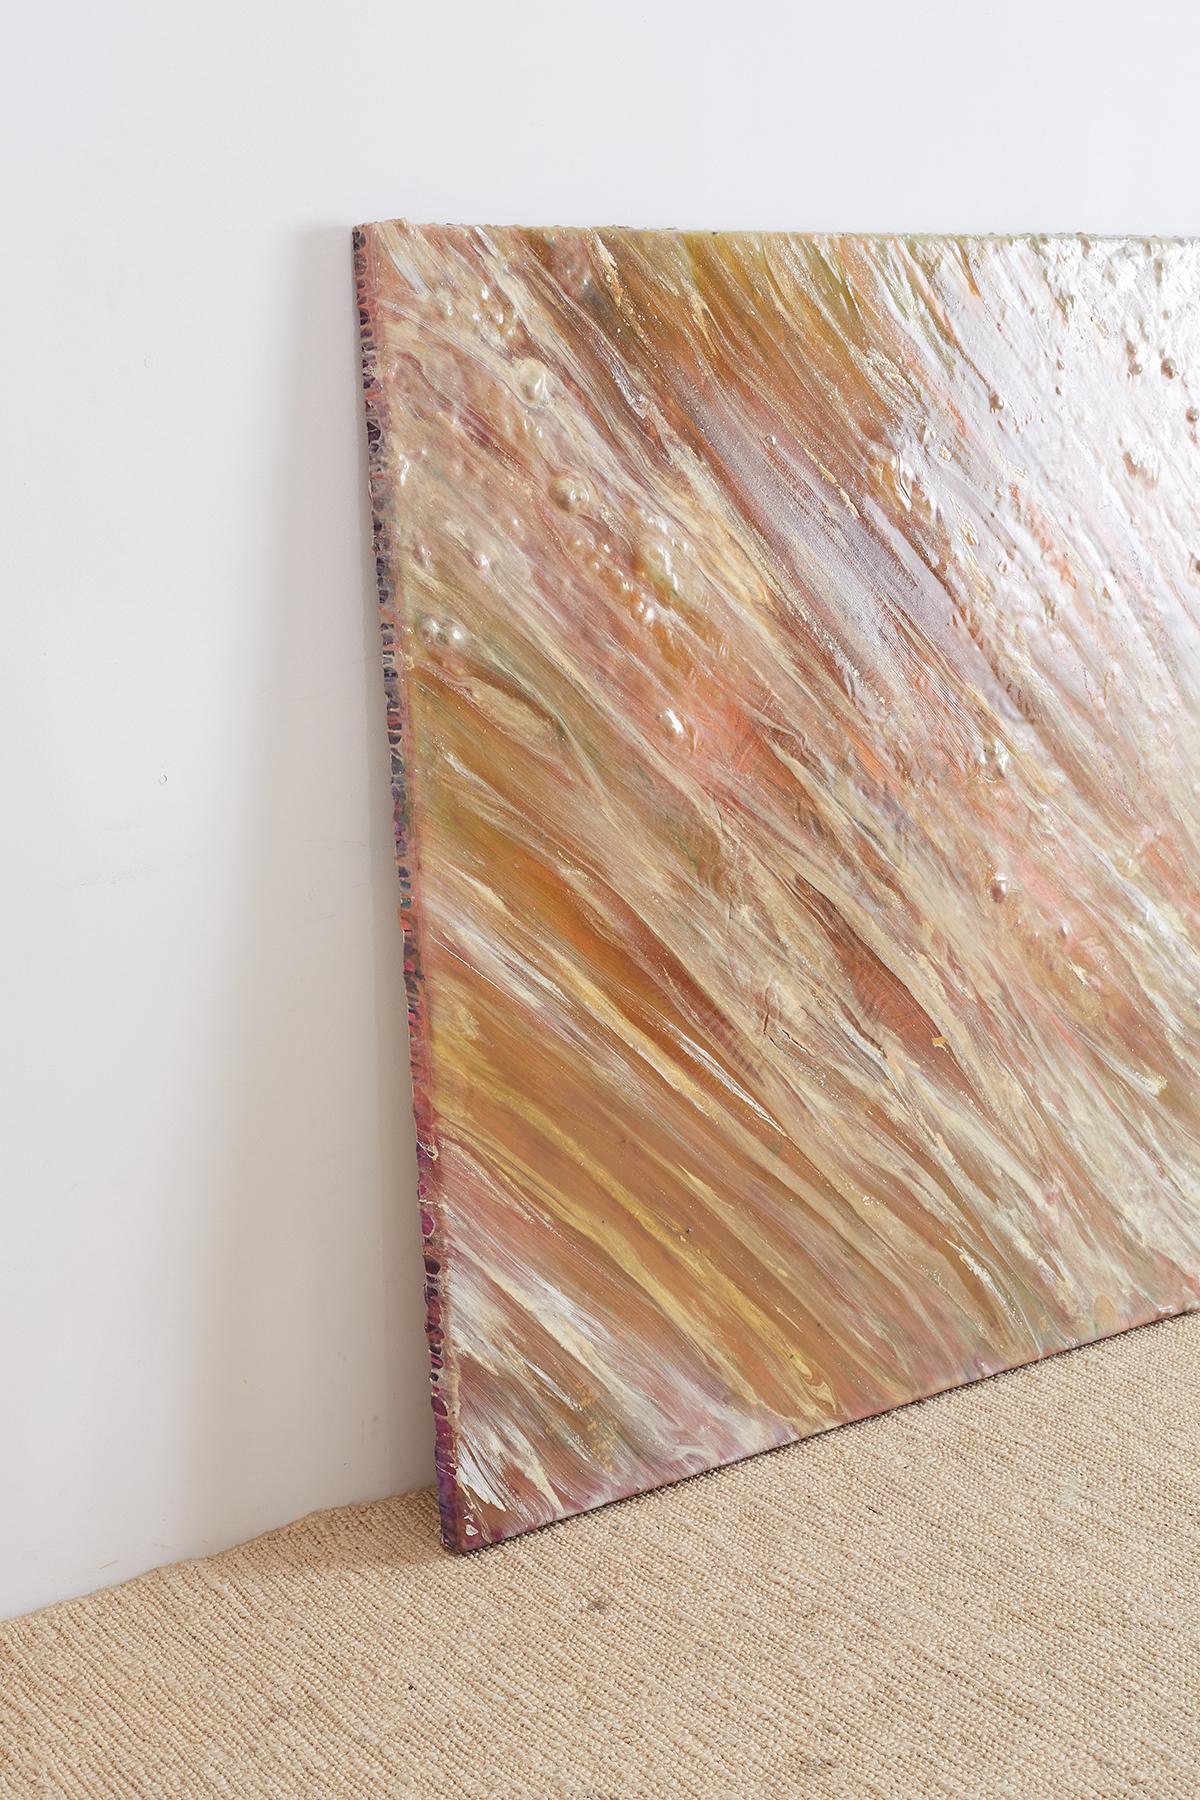 Stunning untitled abstract painting by Bill Kleiman artist/sculptor from Los Angeles, CA. Features an array of colors green, pink, gray, white, and metallic gold. The large painting is made with thick applied paint and almost comes off the canvas,